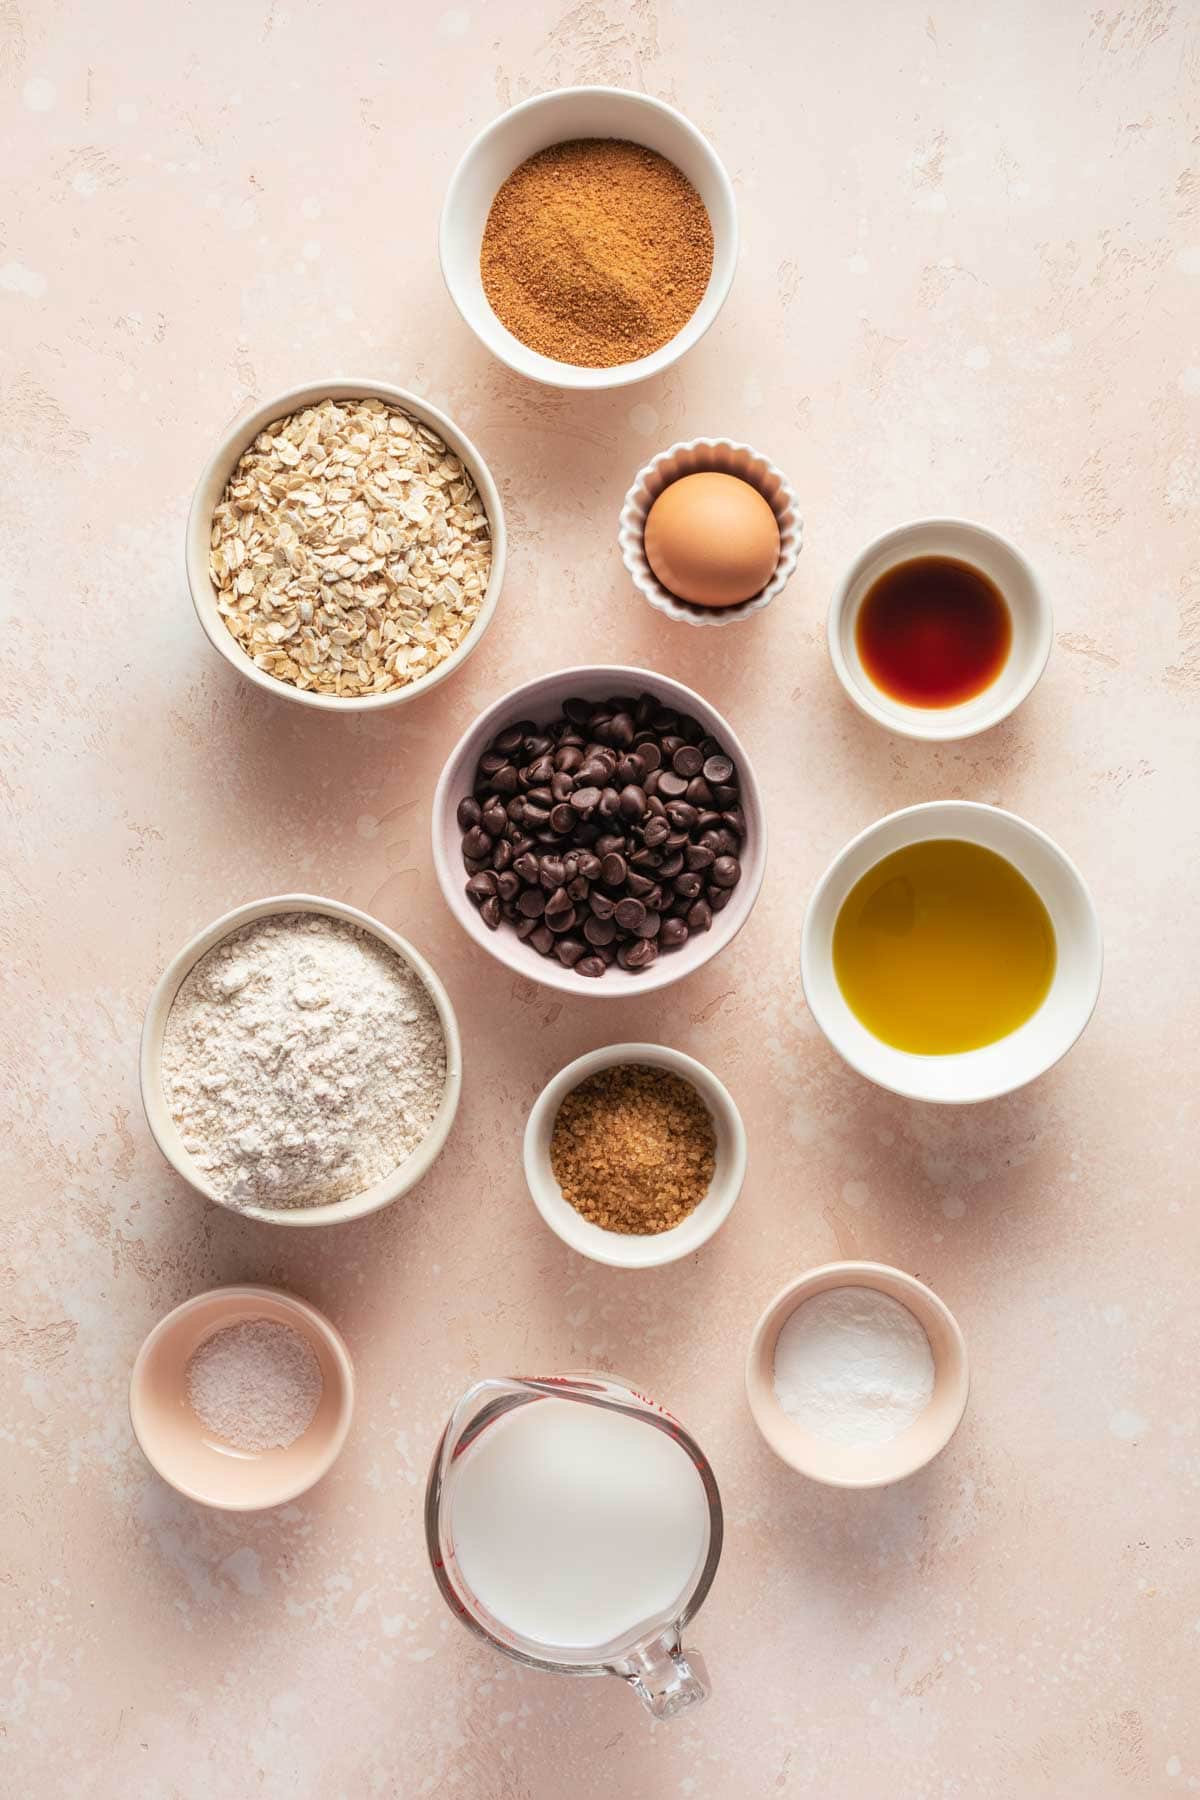 Ingredients to make air fryer muffins arranged in individual dishes on a pink surface.